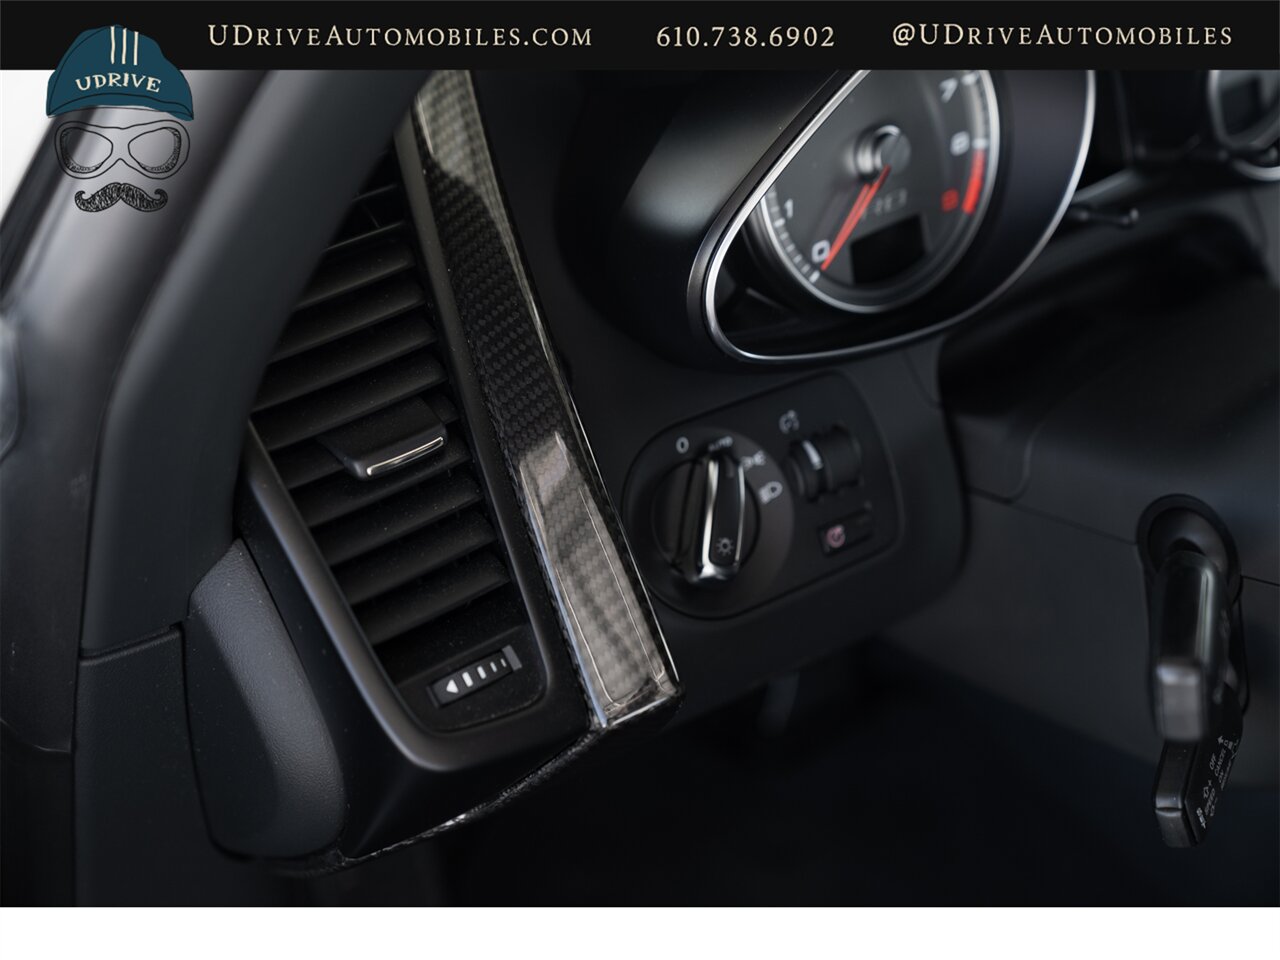 2009 Audi R8 Quattro  4.2L V8 6 Speed Manual - Photo 33 - West Chester, PA 19382